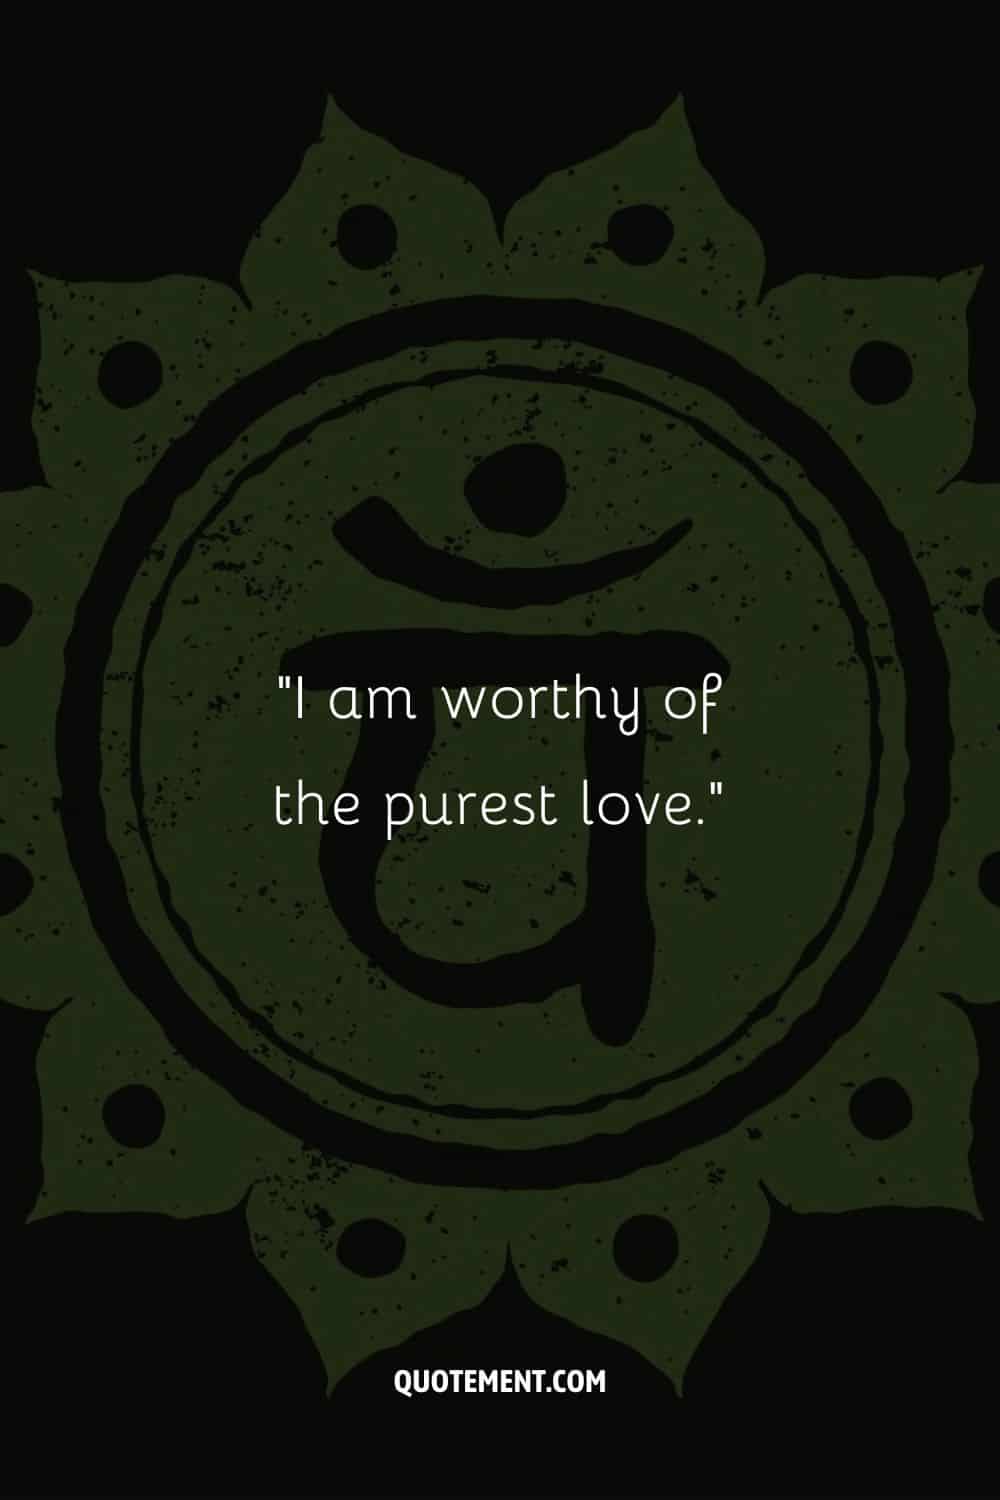 I am worthy of the purest love